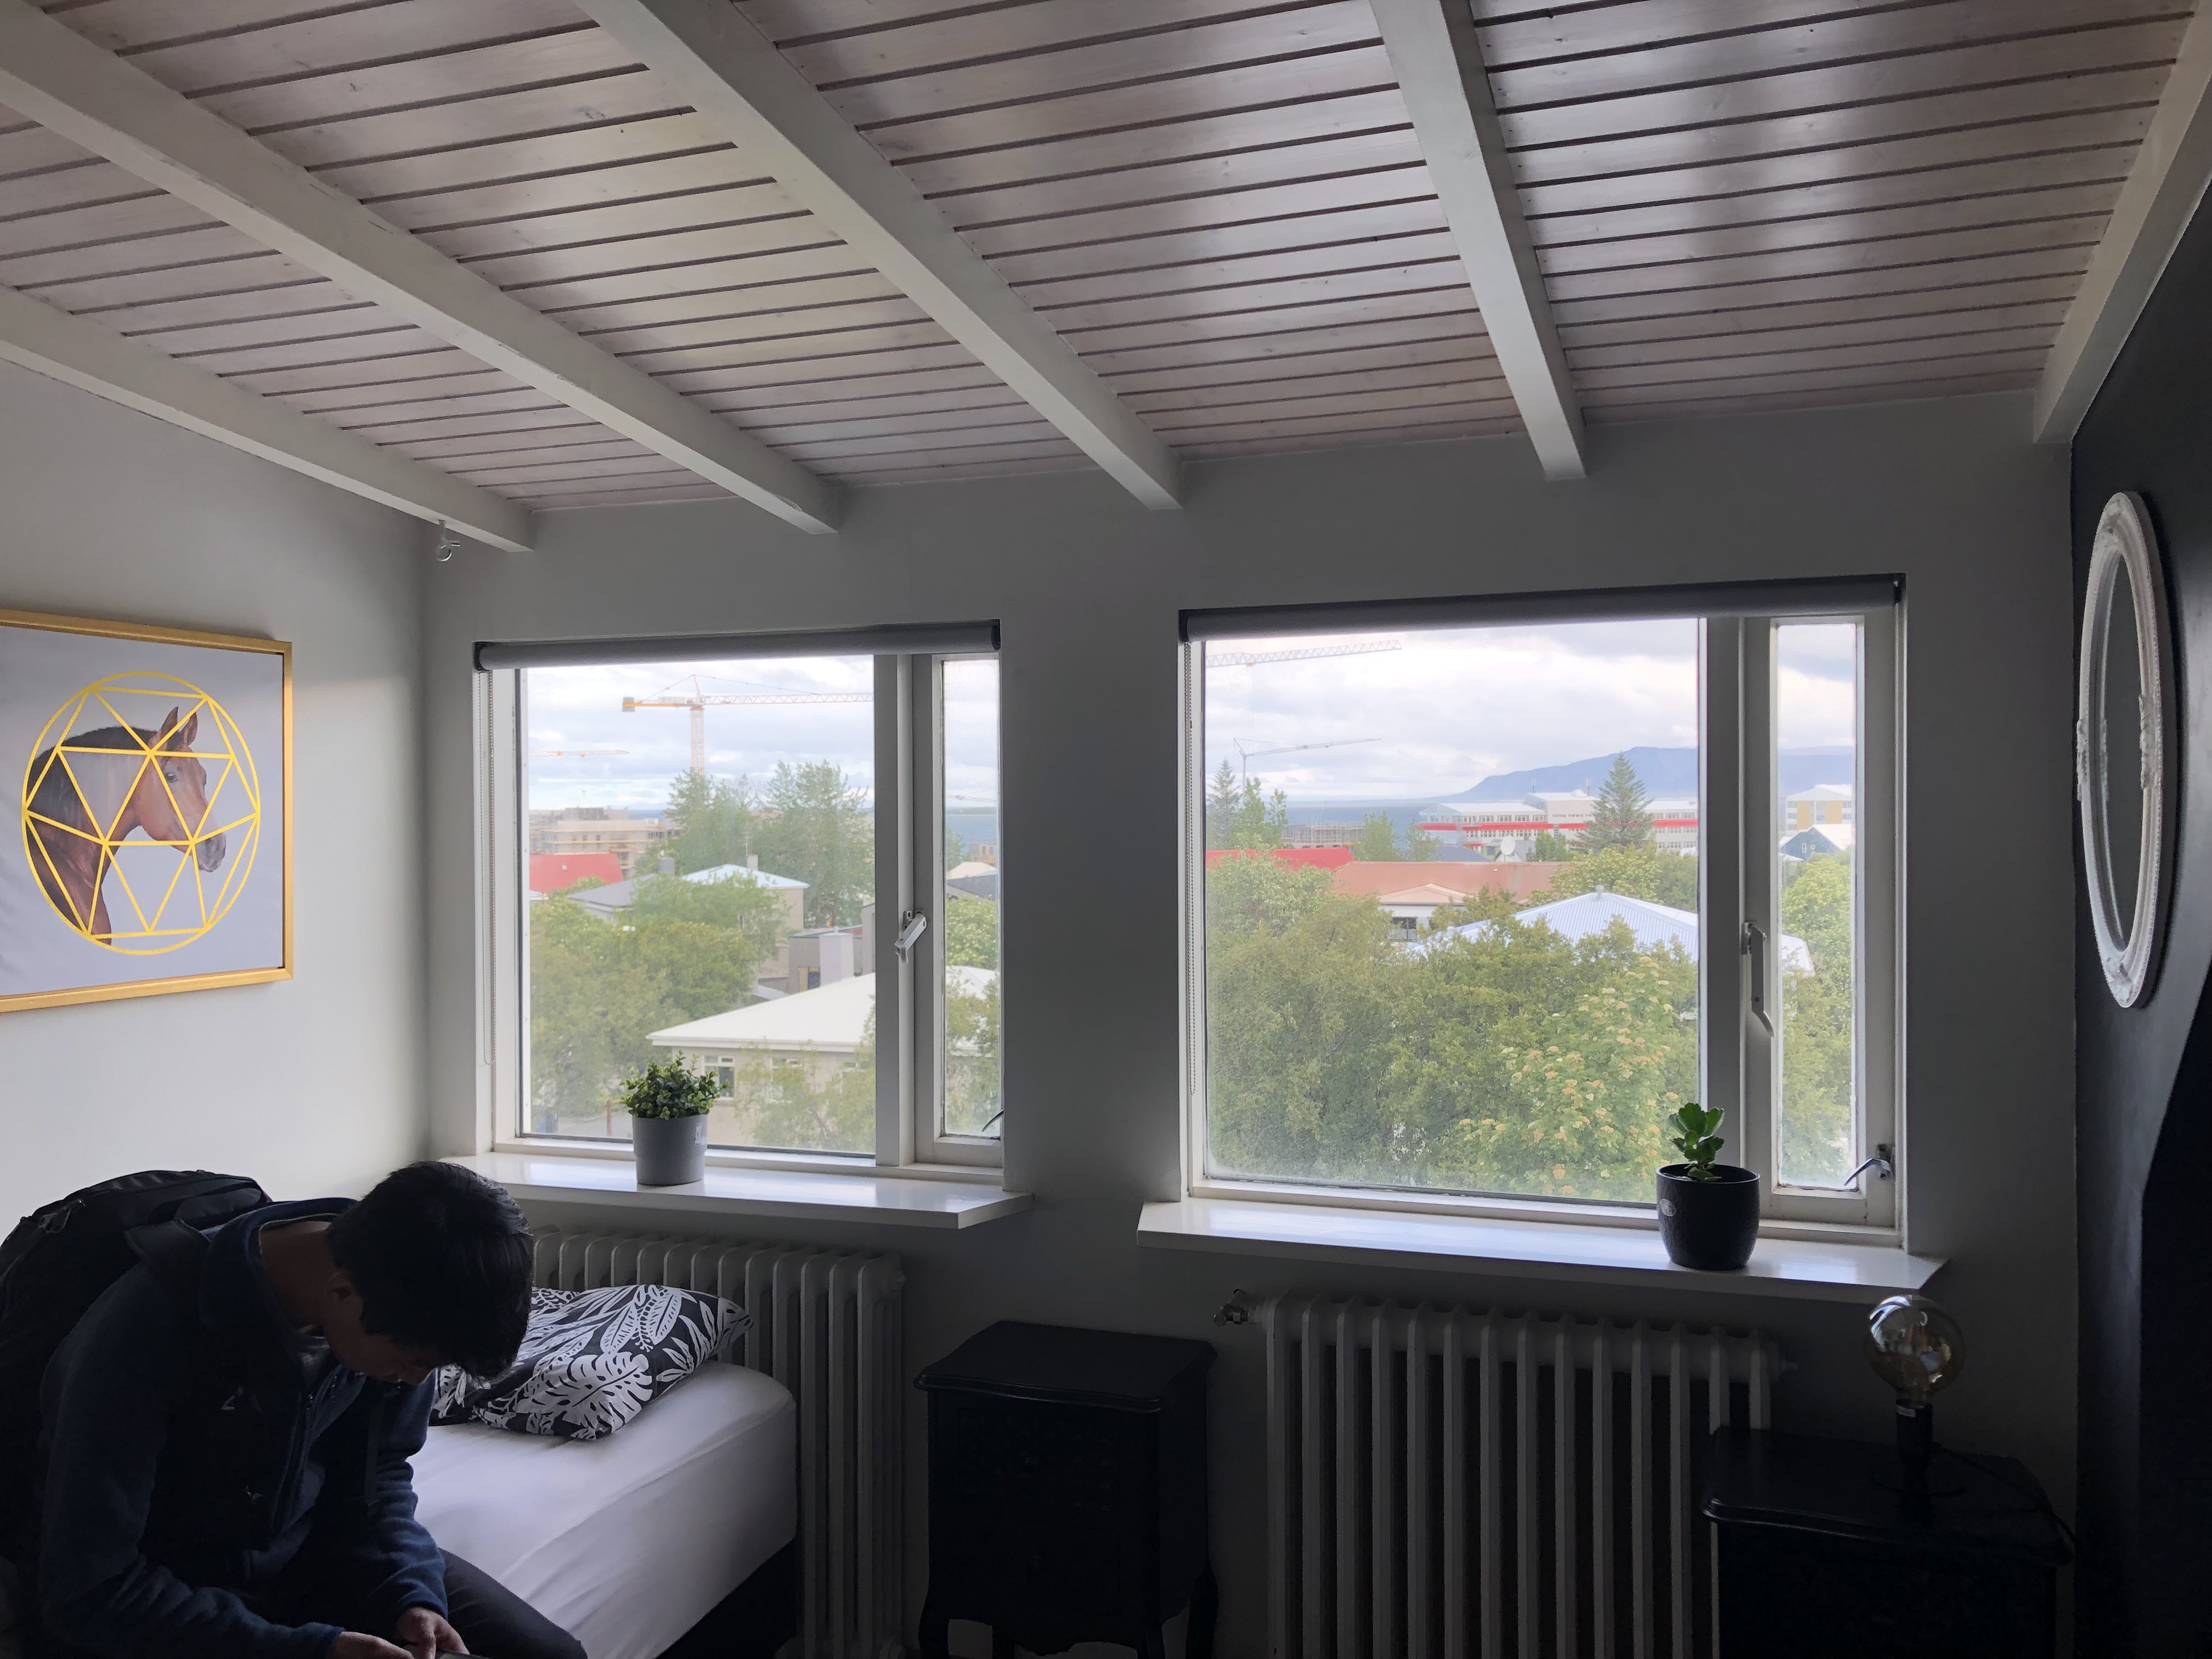 Room with a view of the mountains and ocean in Reykjavik.